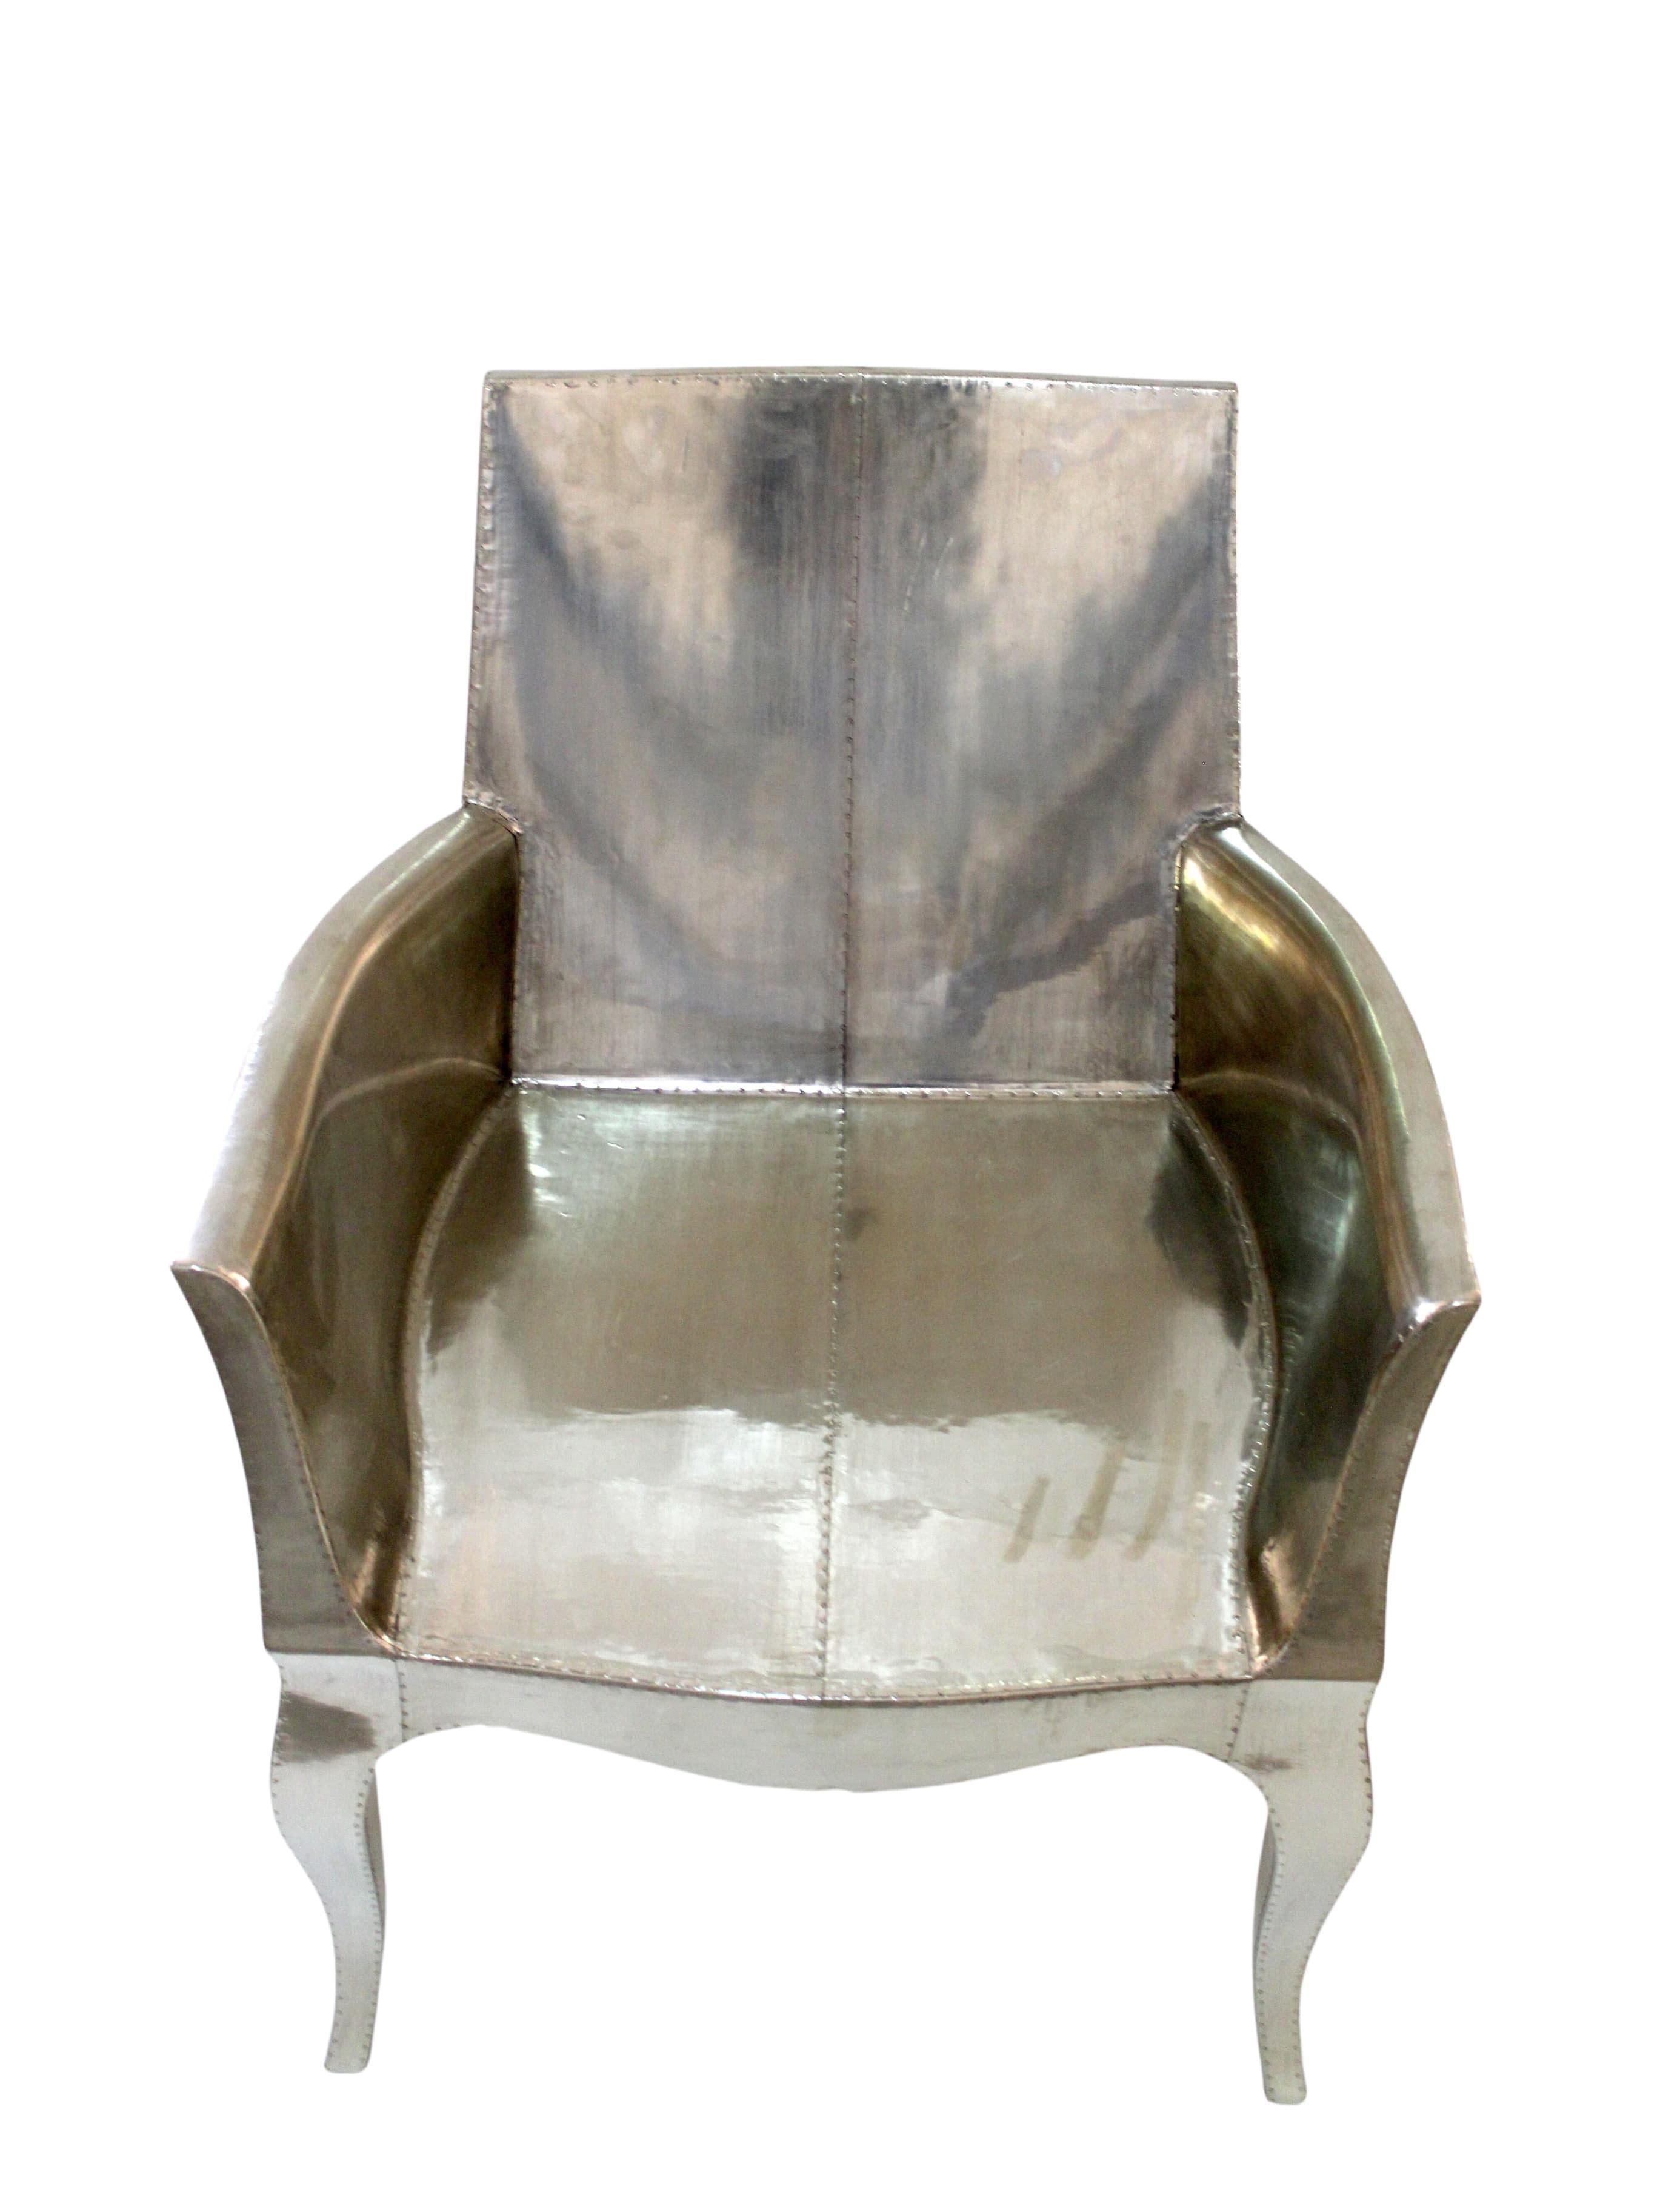 Art Deco Side Chairs Pair Designed by Paul Mathieu for Stephanie Odegard In New Condition For Sale In New York, NY